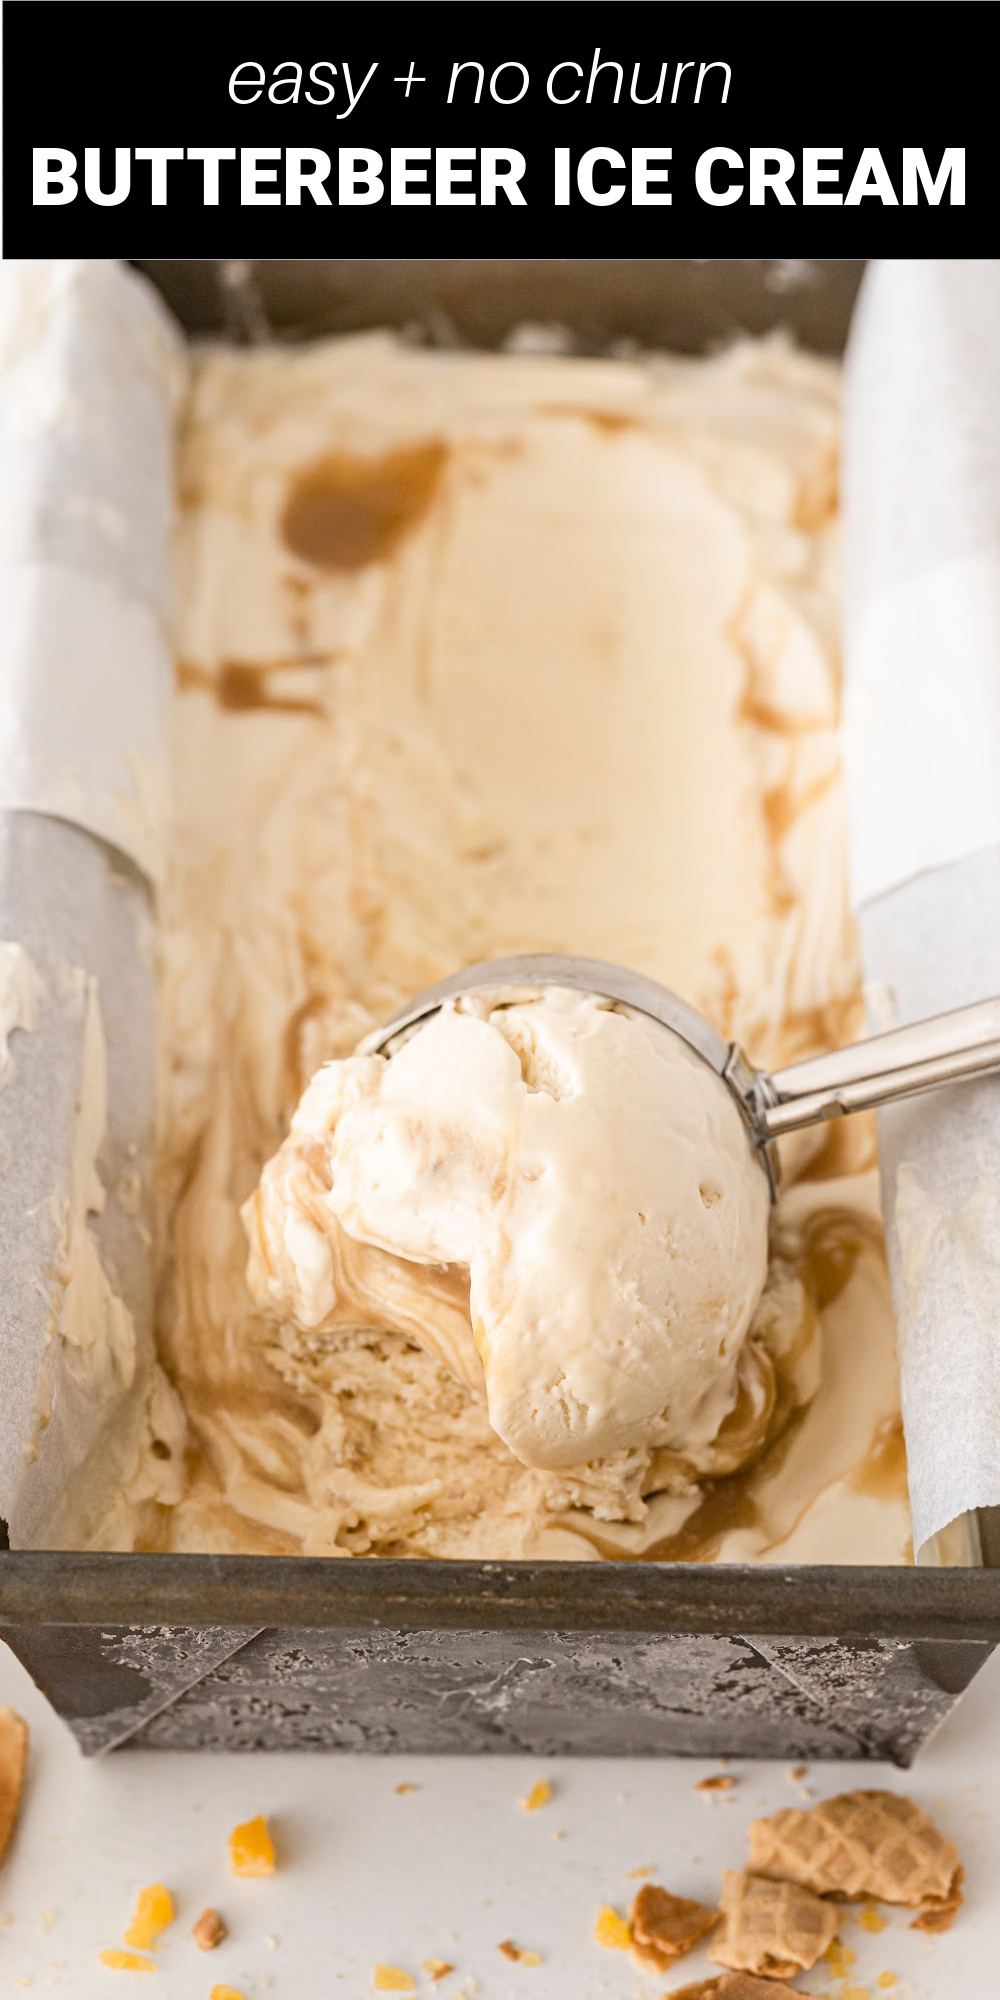 Harry Potter is so creamy and rich. We think it’s the best Homemade Butterbeer Ice Cream. It’s so much fun to make and transports you to the Three Broomsticks Inn in Hogsmeade.